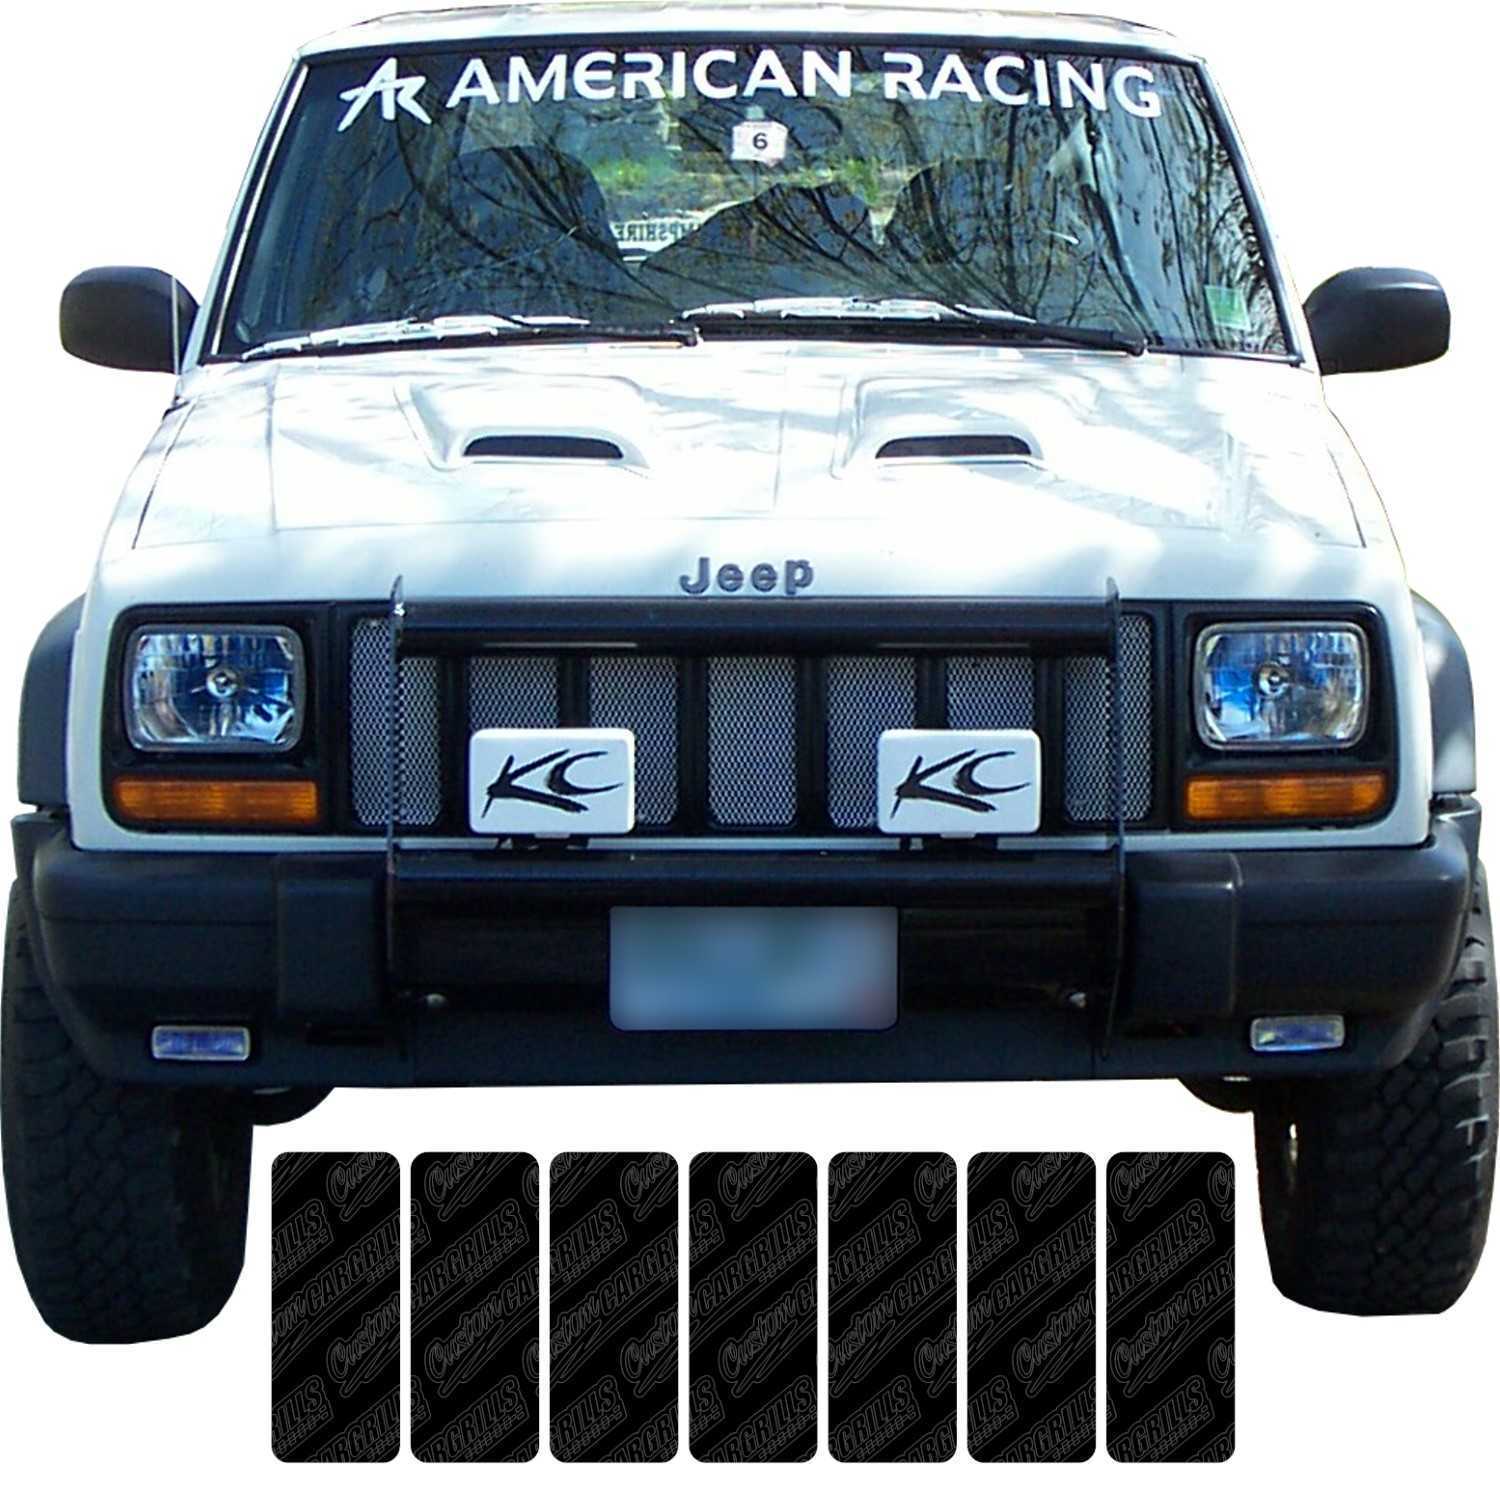 1997 - 2001 Jeep Cherokee Mesh Grill Template #1